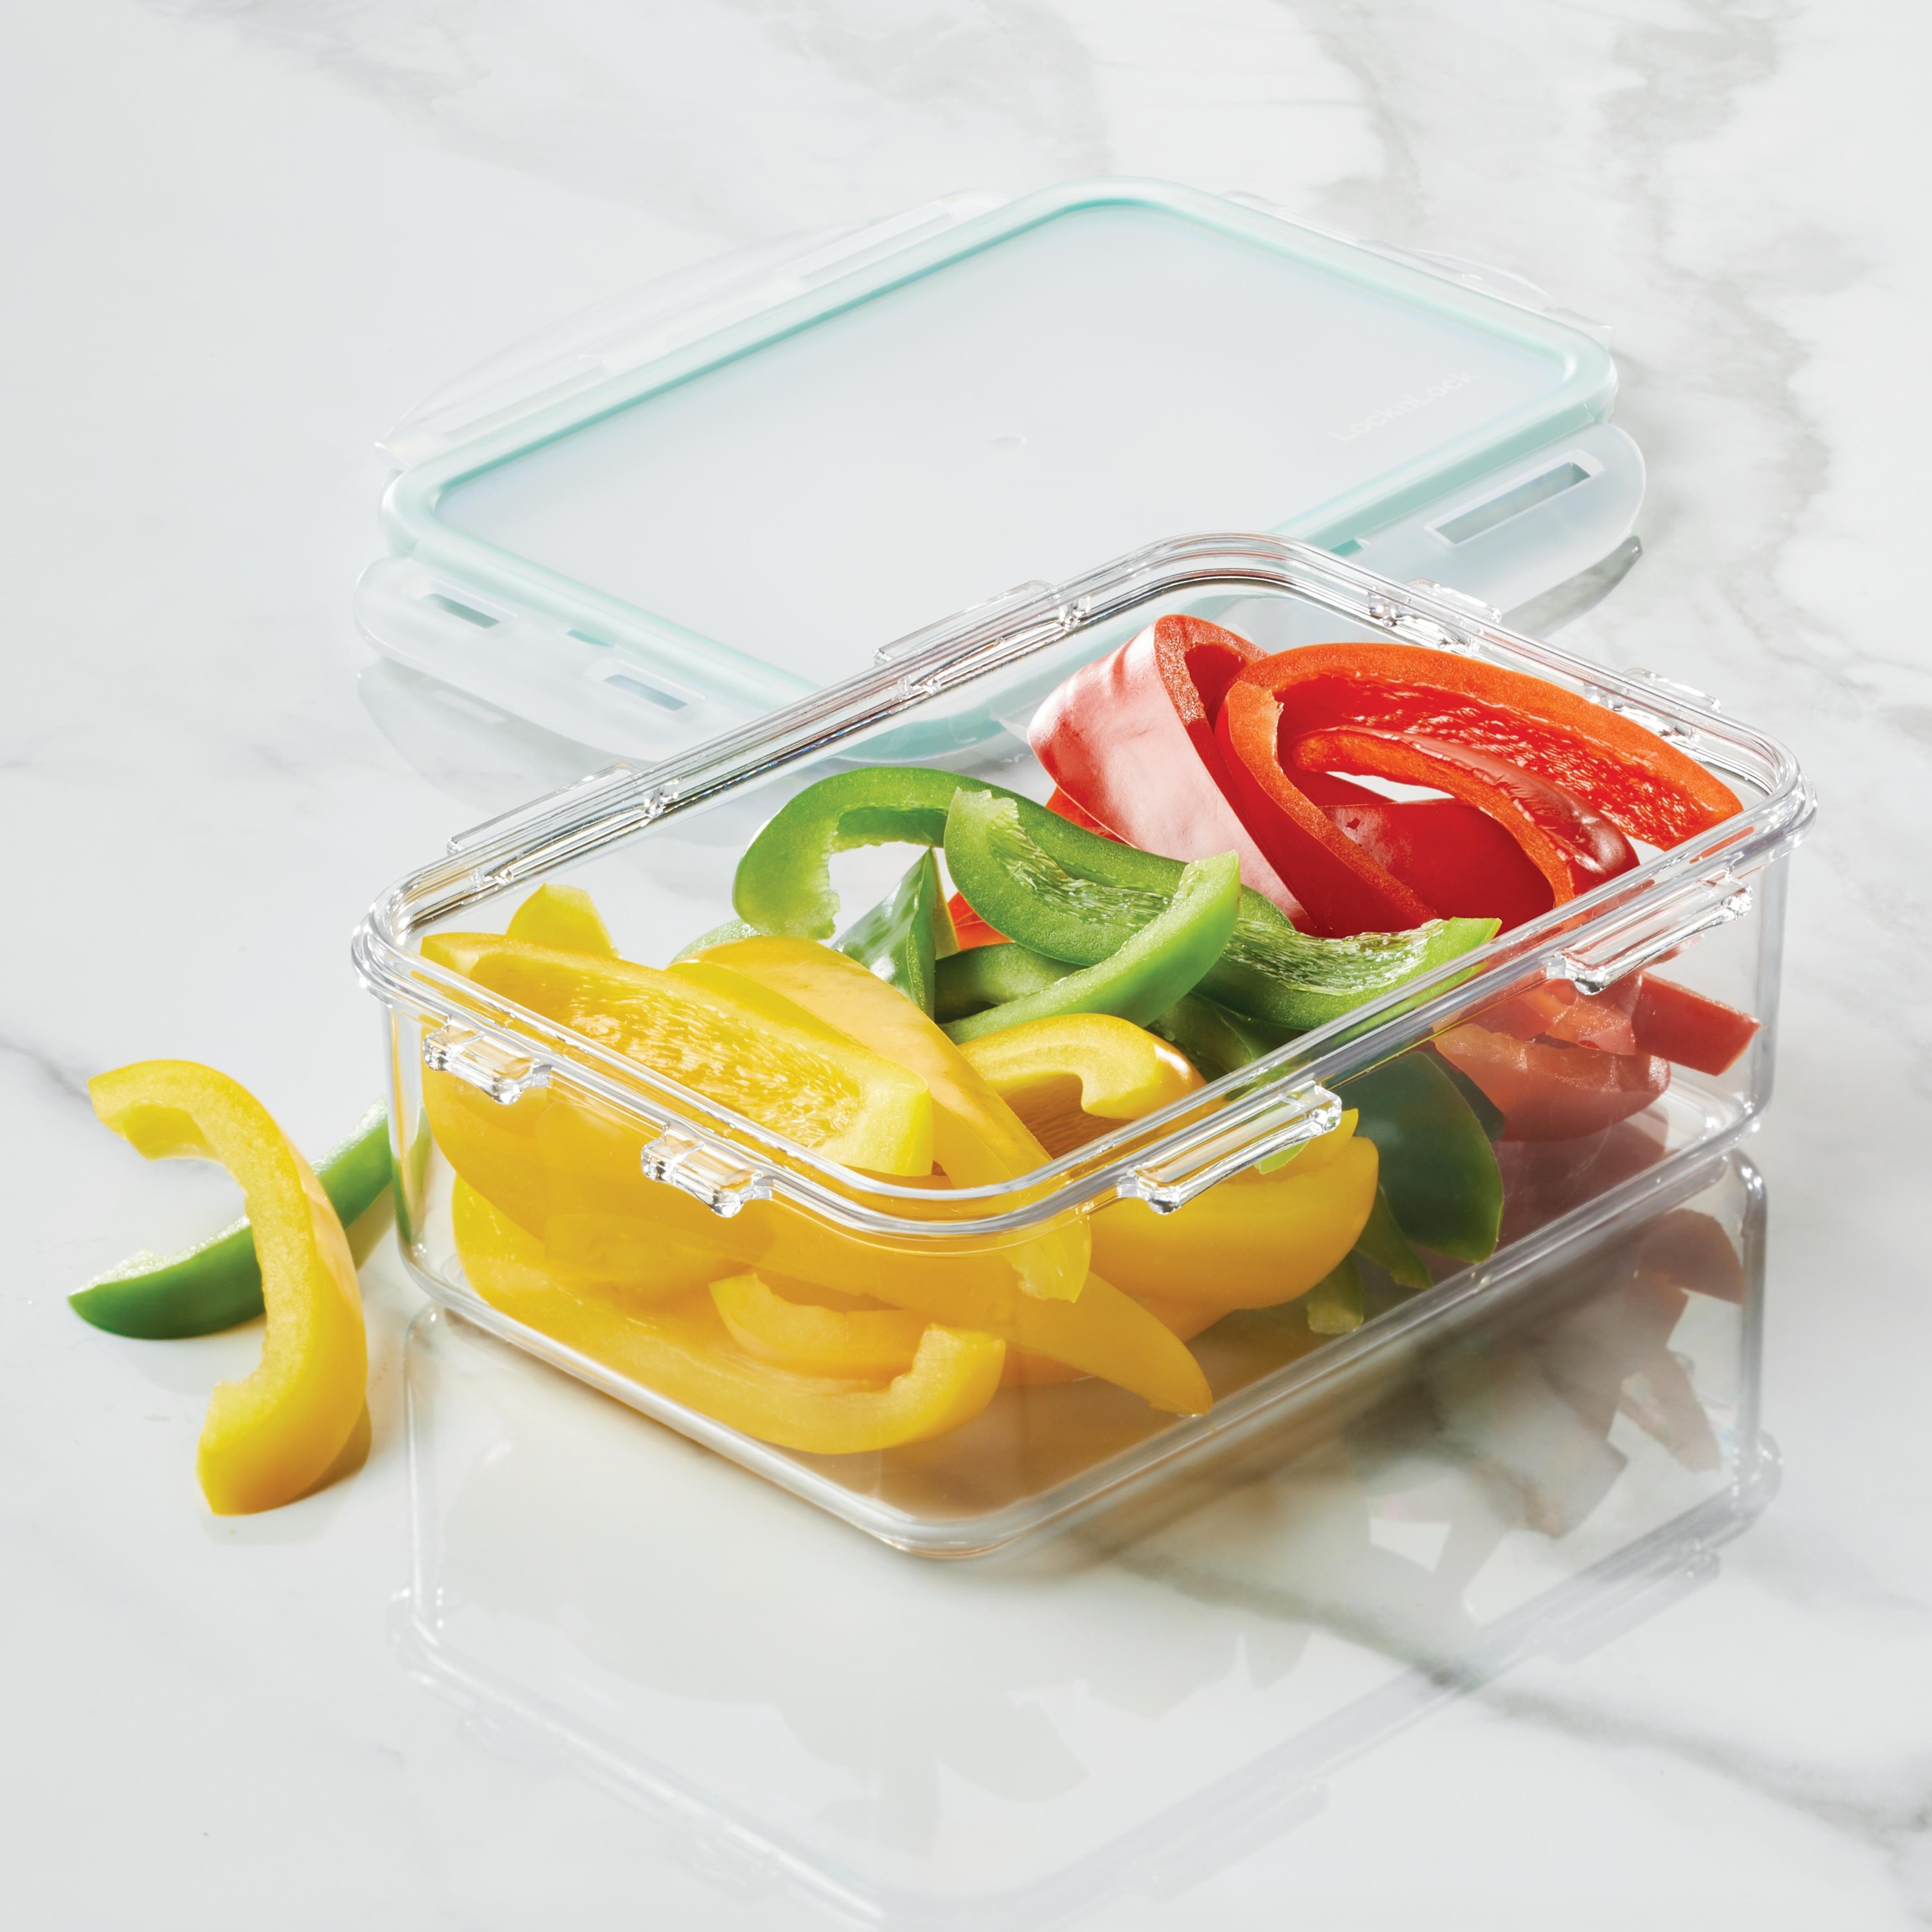 https://ak1.ostkcdn.com/images/products/is/images/direct/fc487f35072bb3f827f2bb5633db58206d75d730/LocknLock-Purely-Better-Food-Storage-Containers-25oz-4-PC-Set.jpg